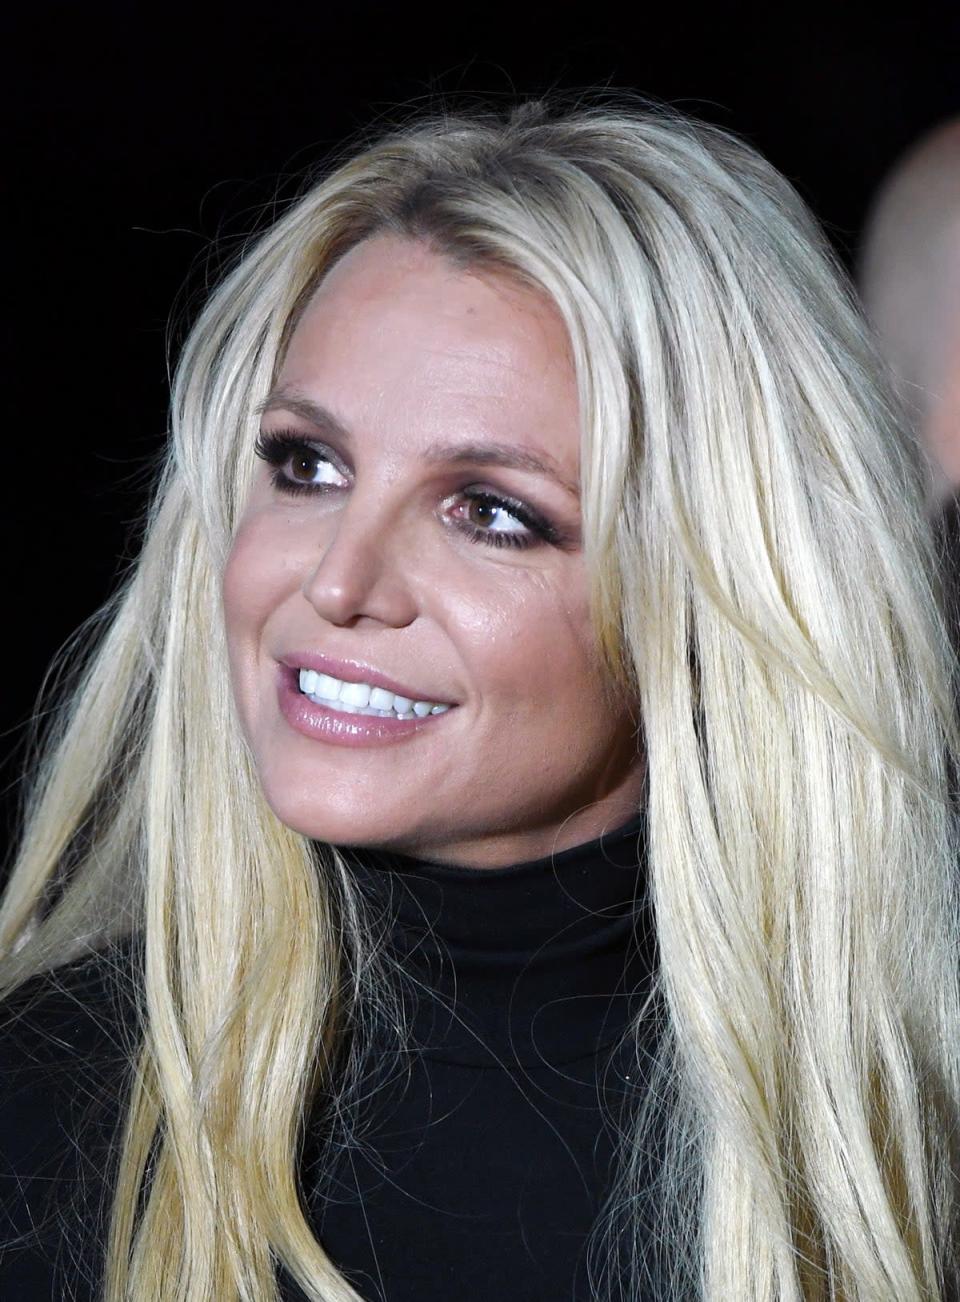 Britney Spears has yet to speak out about the high-profile collaboration (Getty Images)